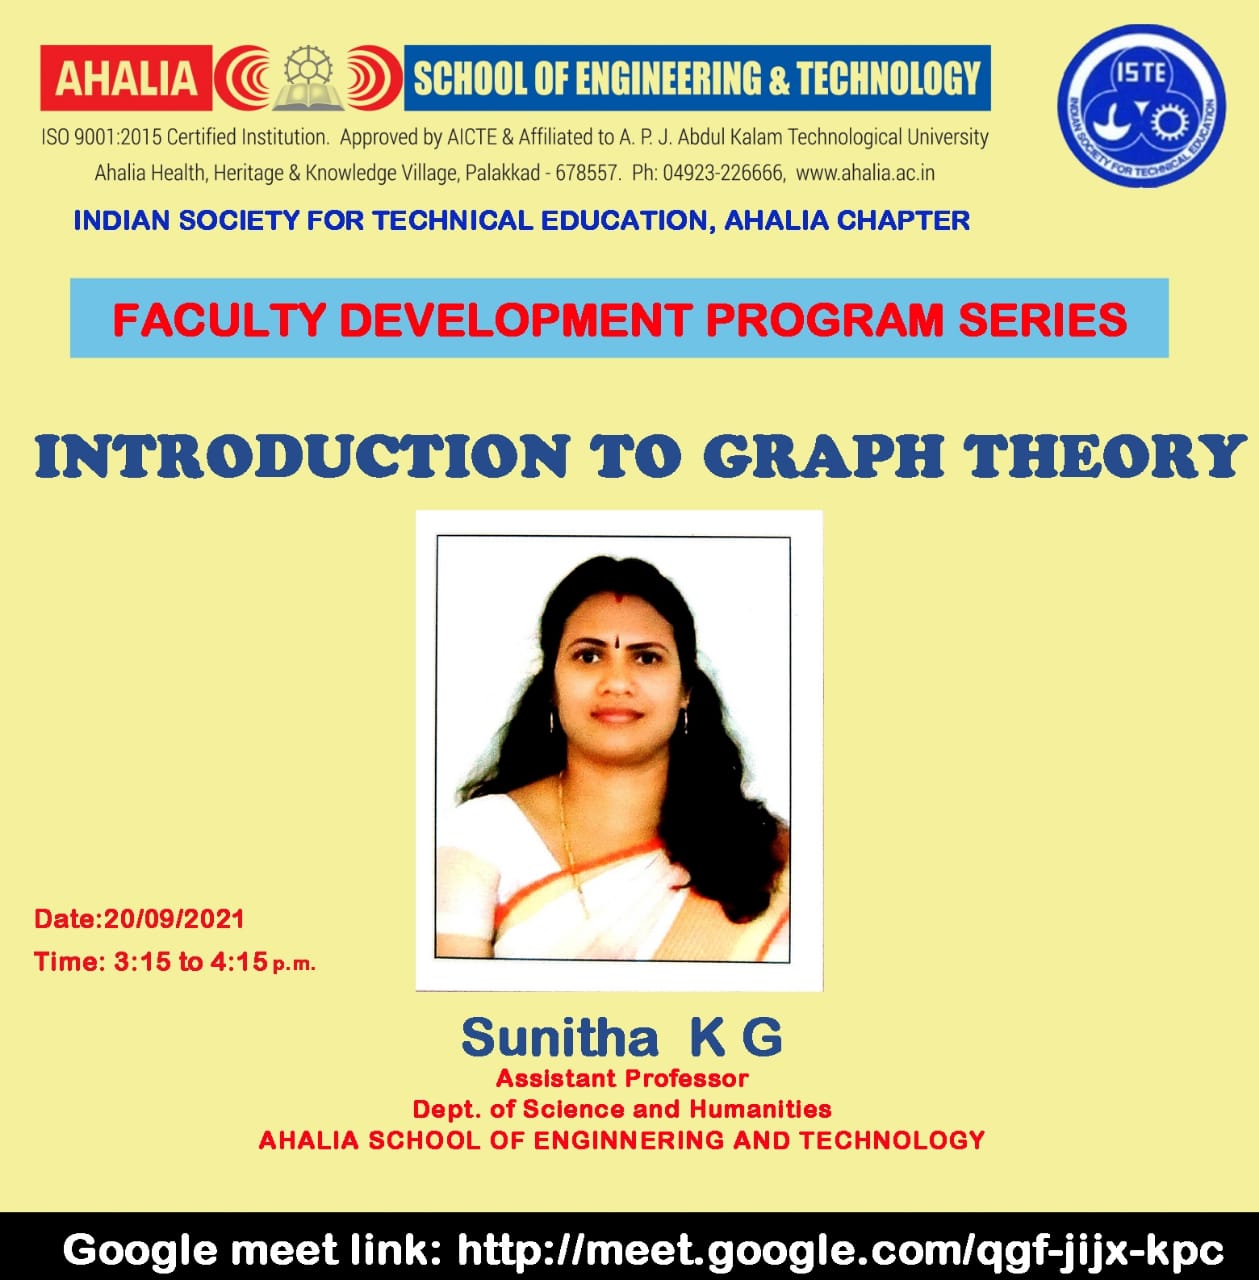 FDP on ‘Introduction to Graph Theory’